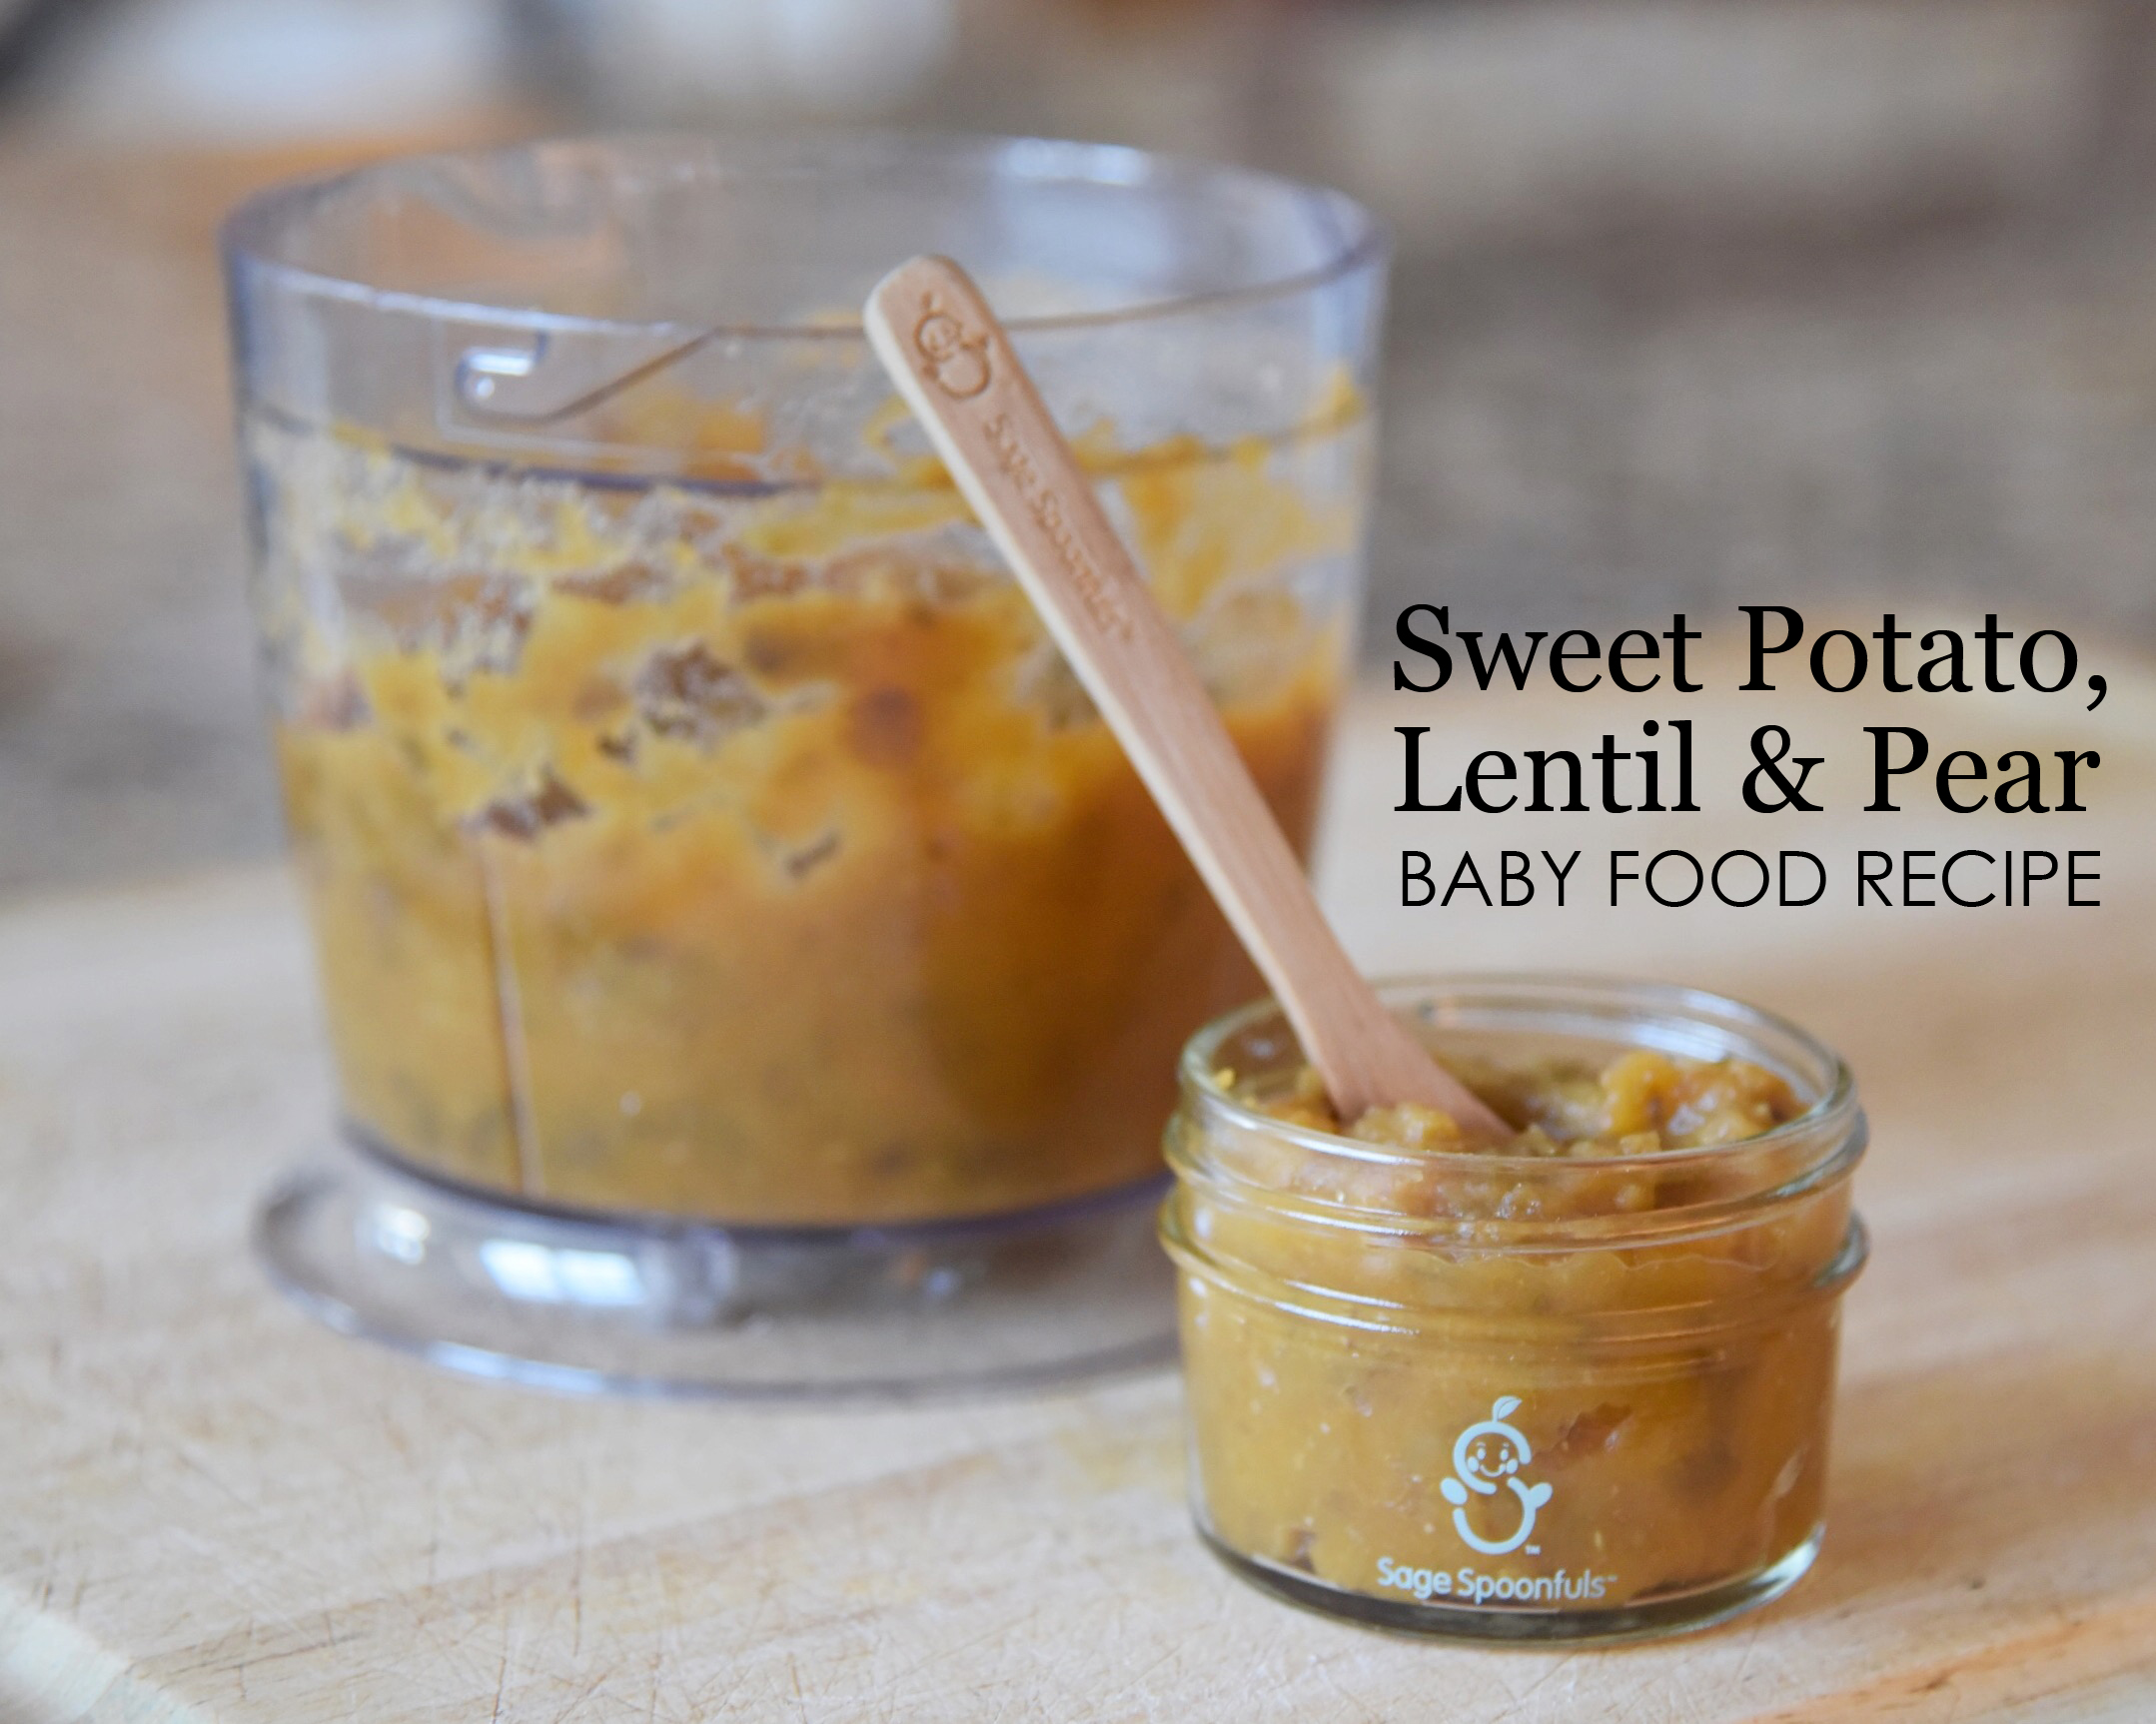 Sweet Potato, Lentil and Pear Baby Food Recipe